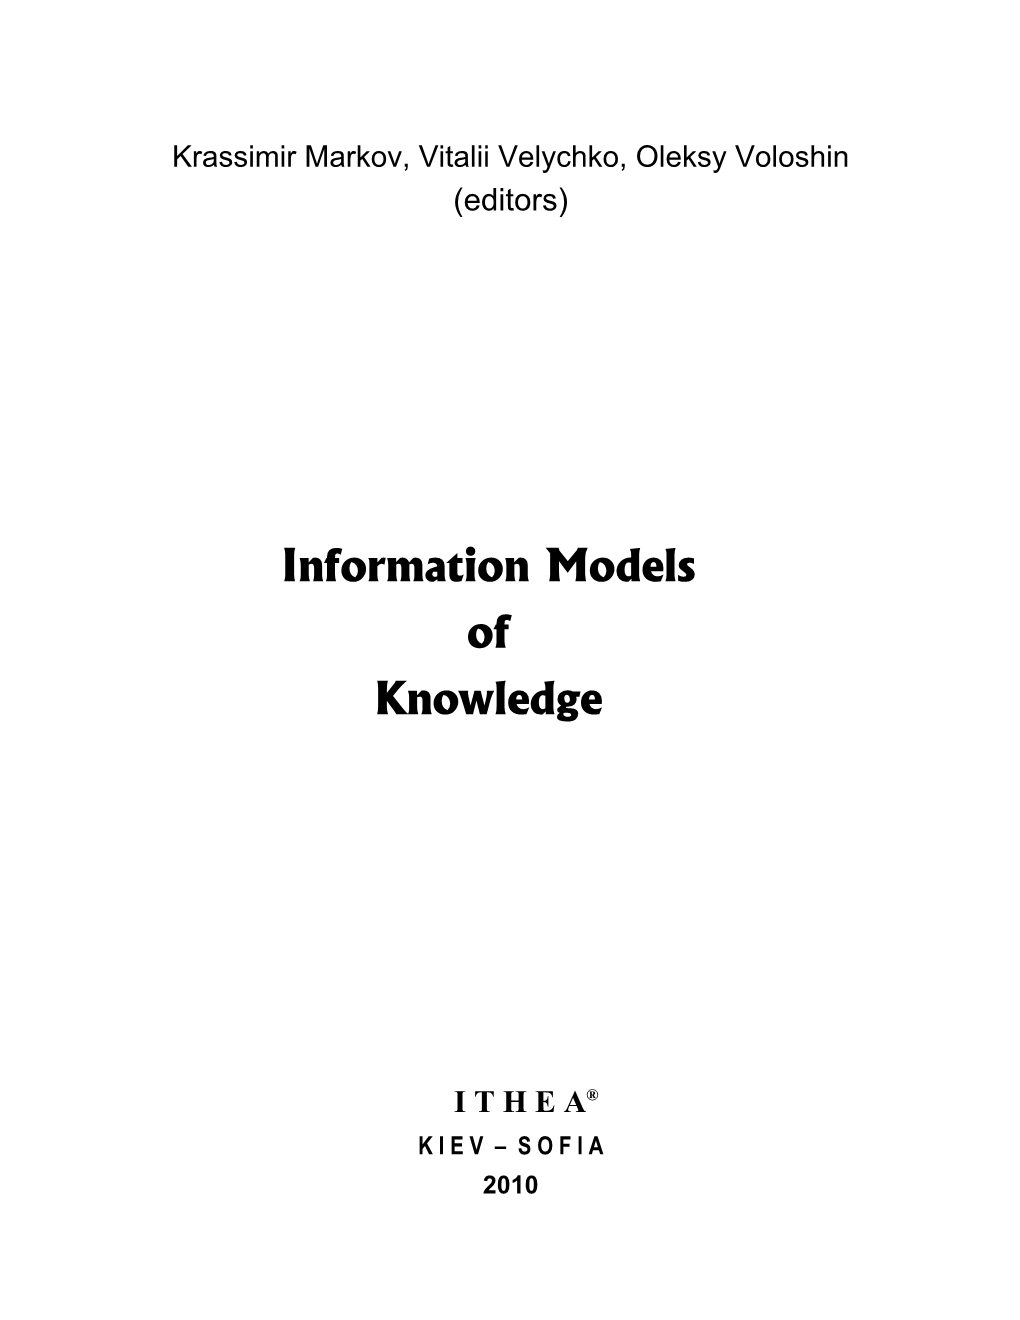 Information Models of Knowledge